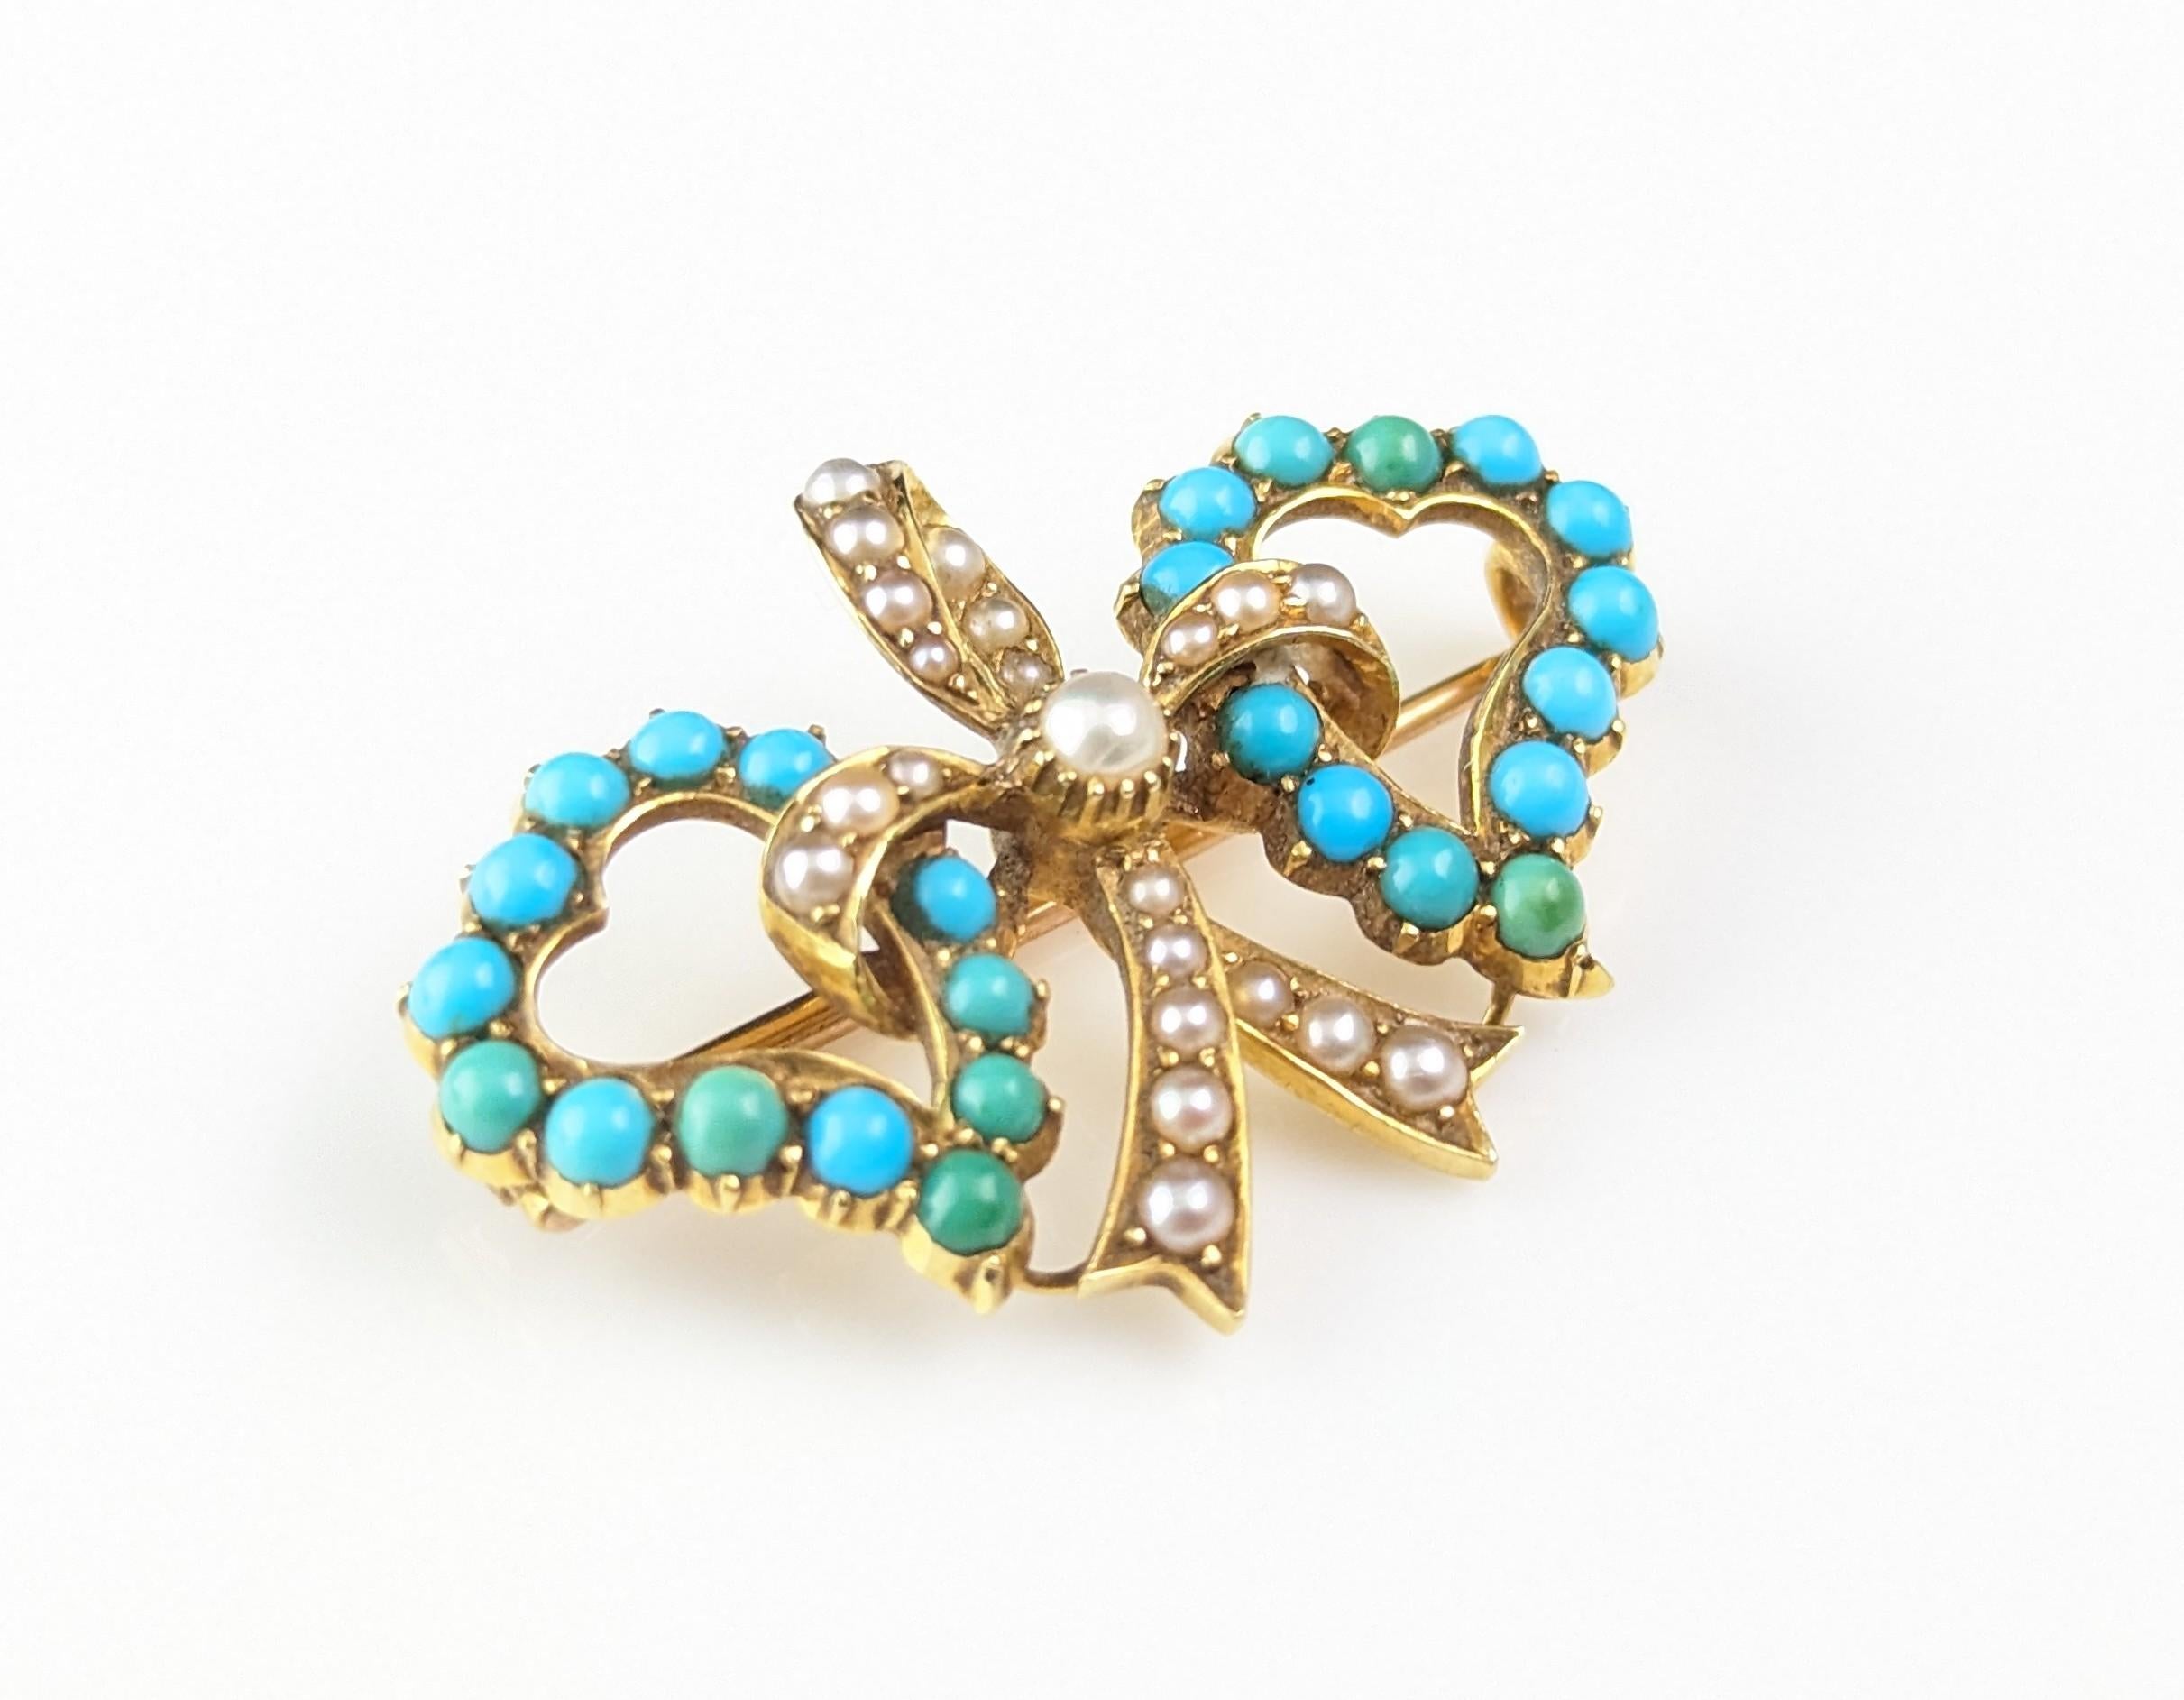 Antique Victorian double Witches heart brooch, 22k gold, Turquoise and pearl  6